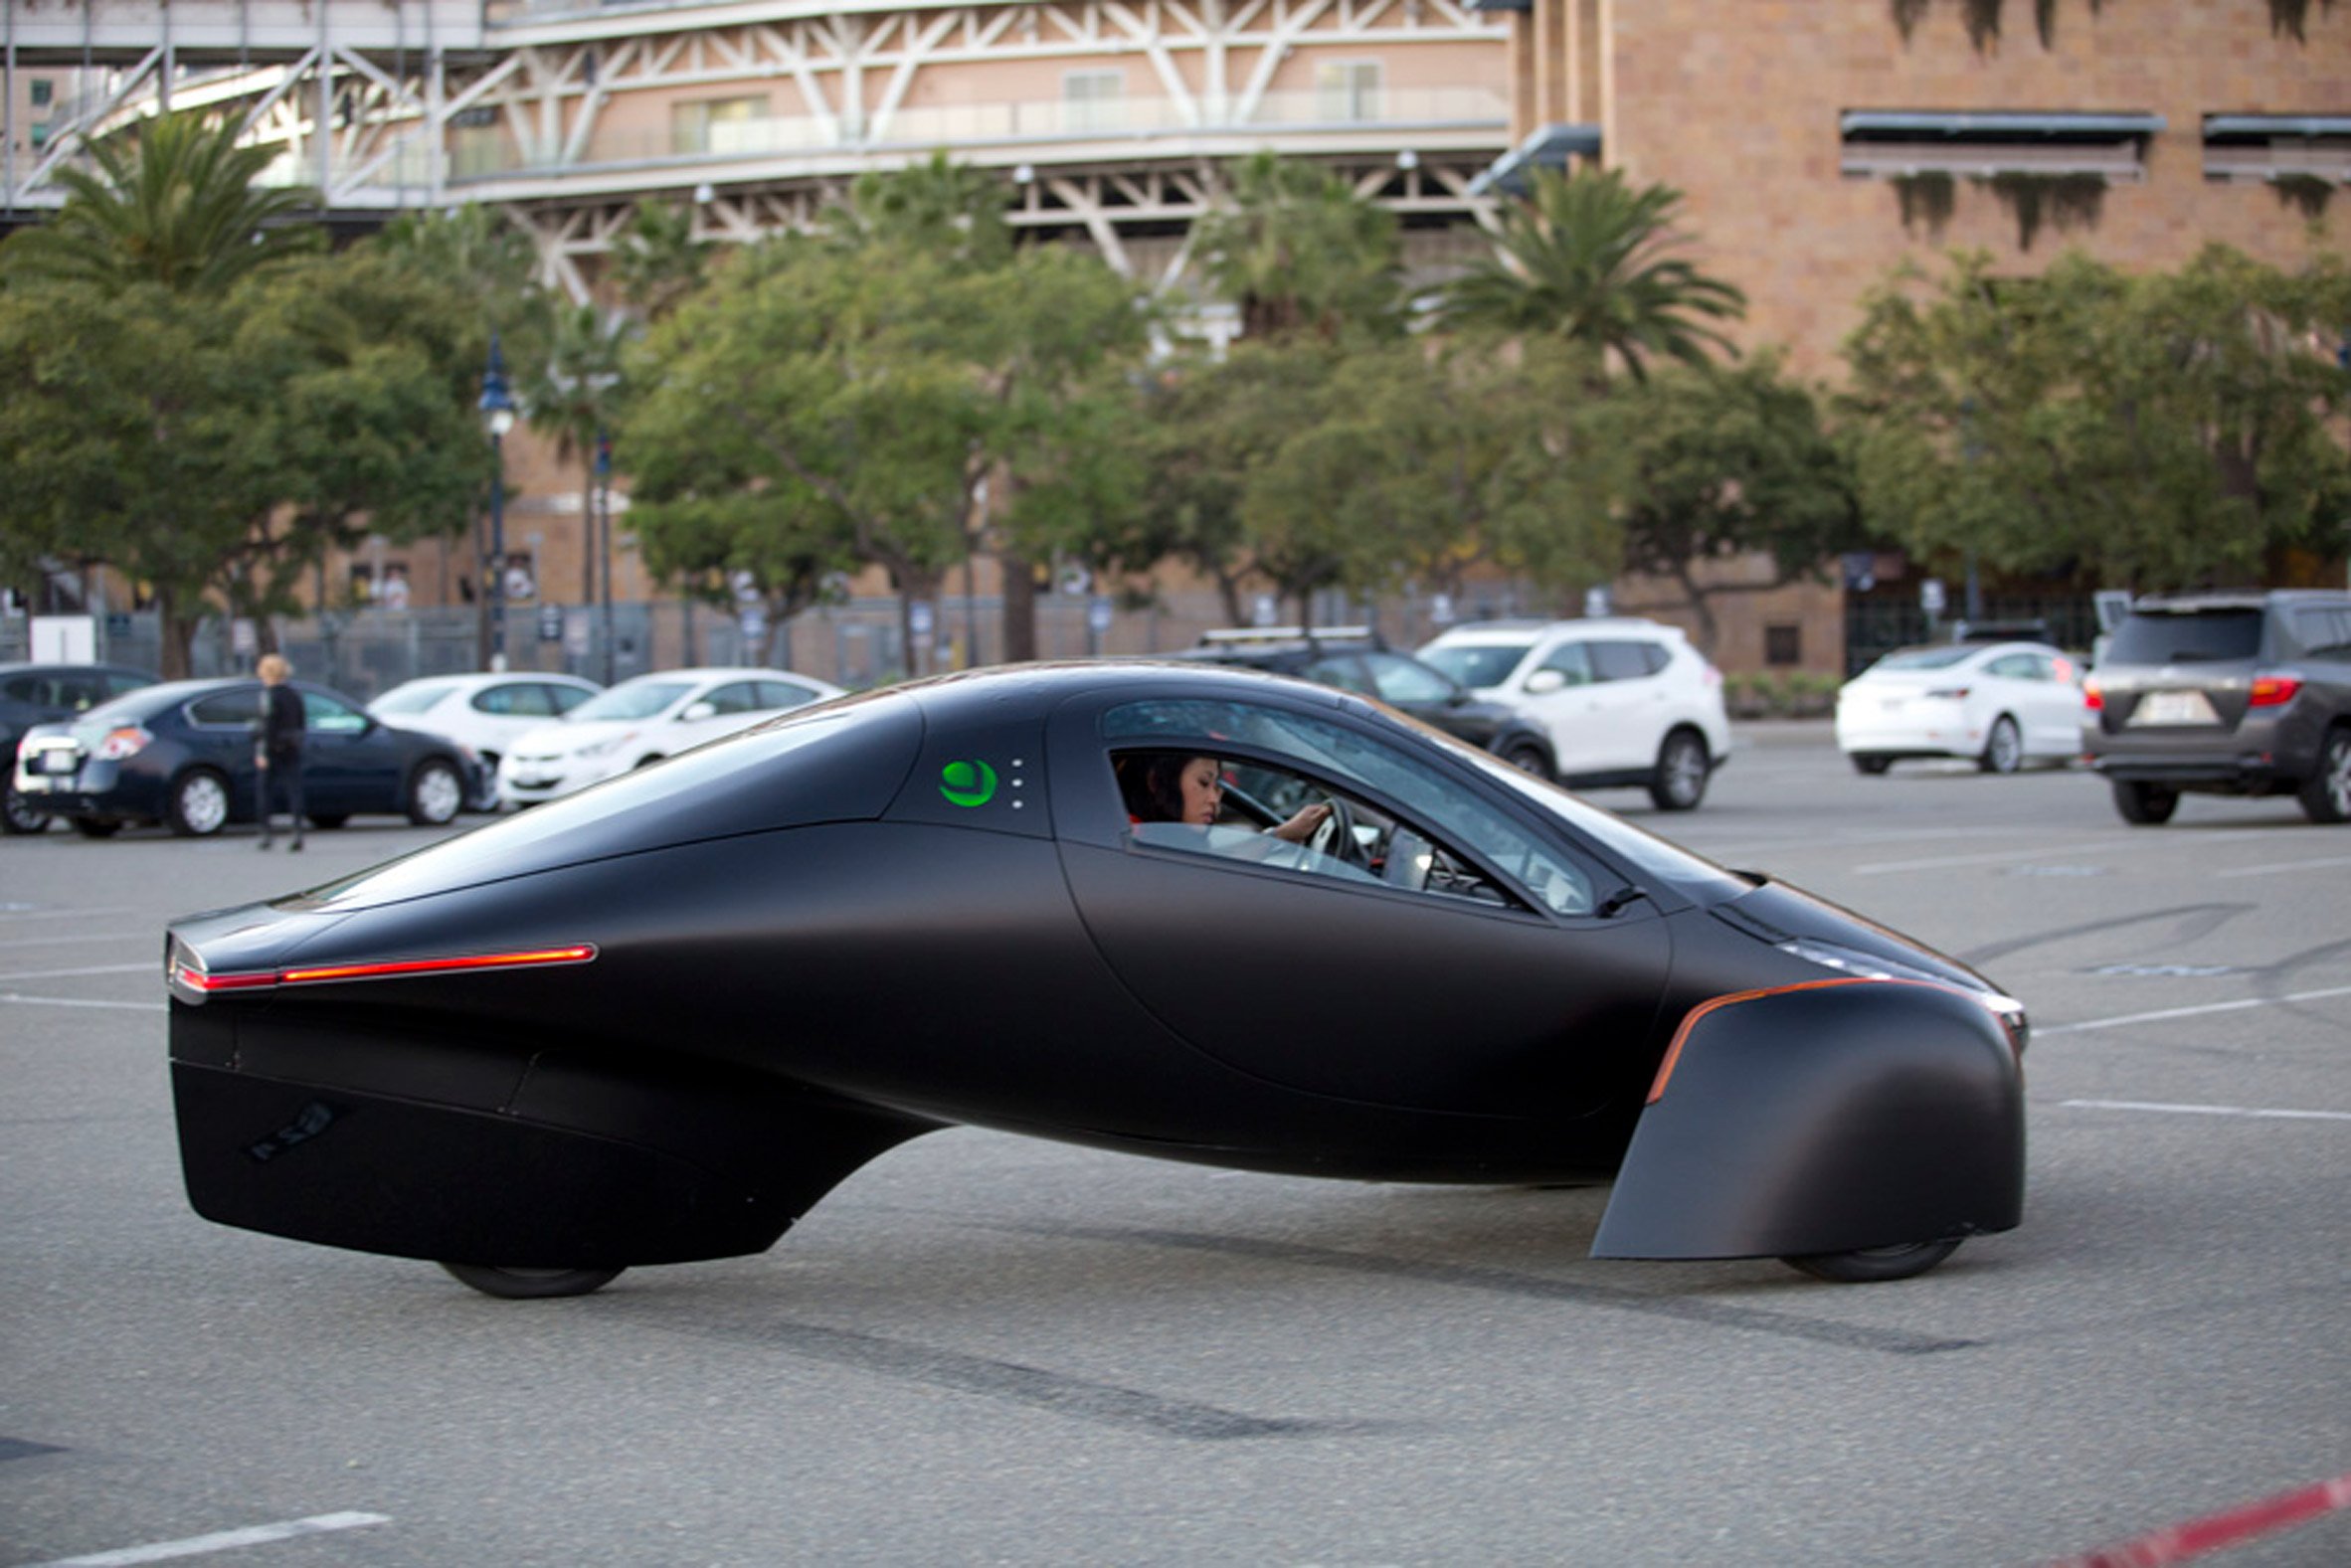 Side view of the three-wheeled solar and electric Aptera vehicle